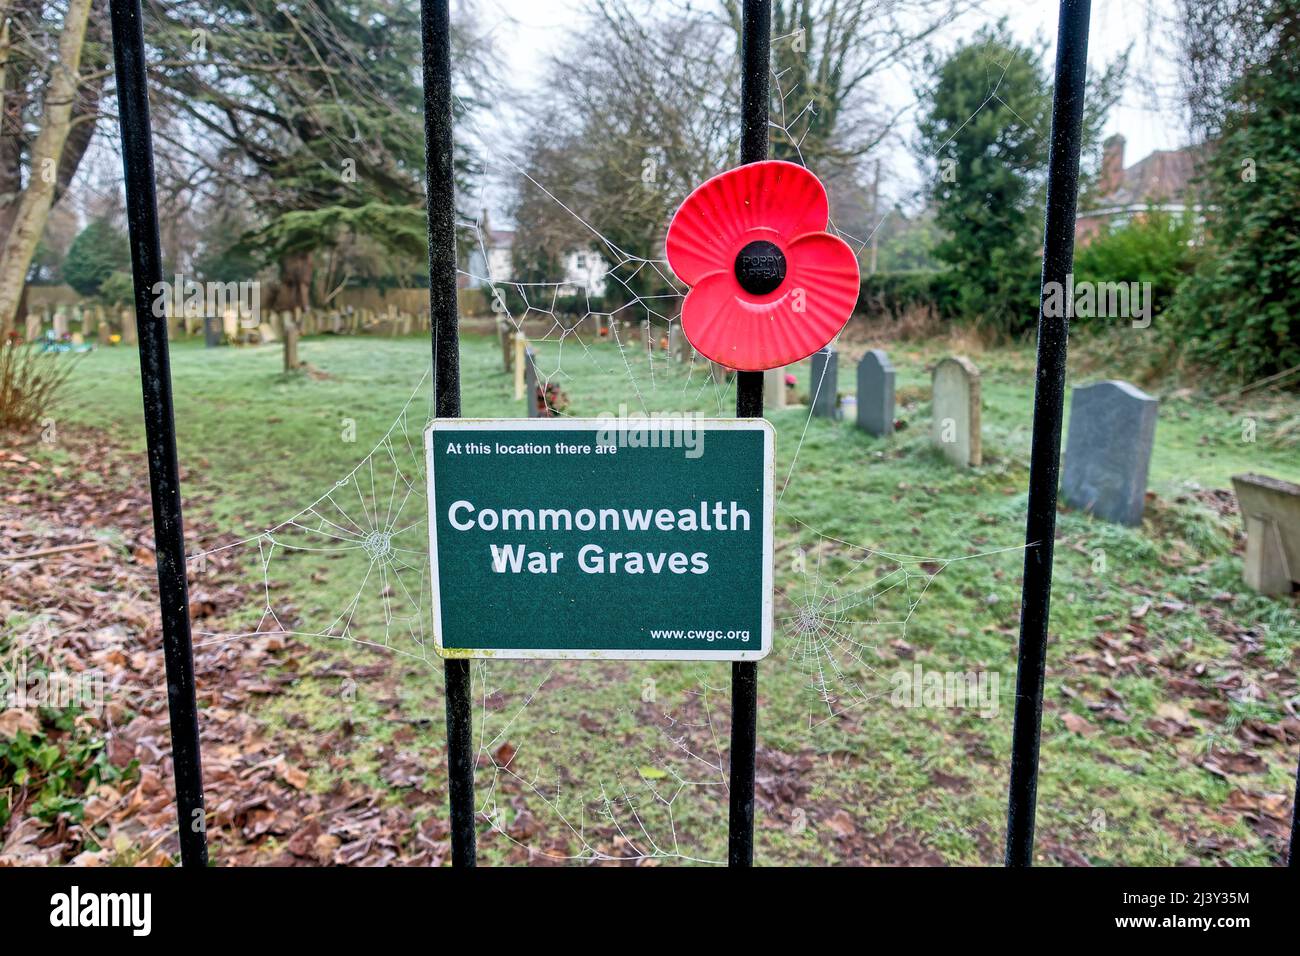 Warminster, Wiltshire,UK - January 18 2022: A Commonwealth War Graves sign and a Red Plastic Remembrance poppy on a churchyard gate at St Johns church Stock Photo